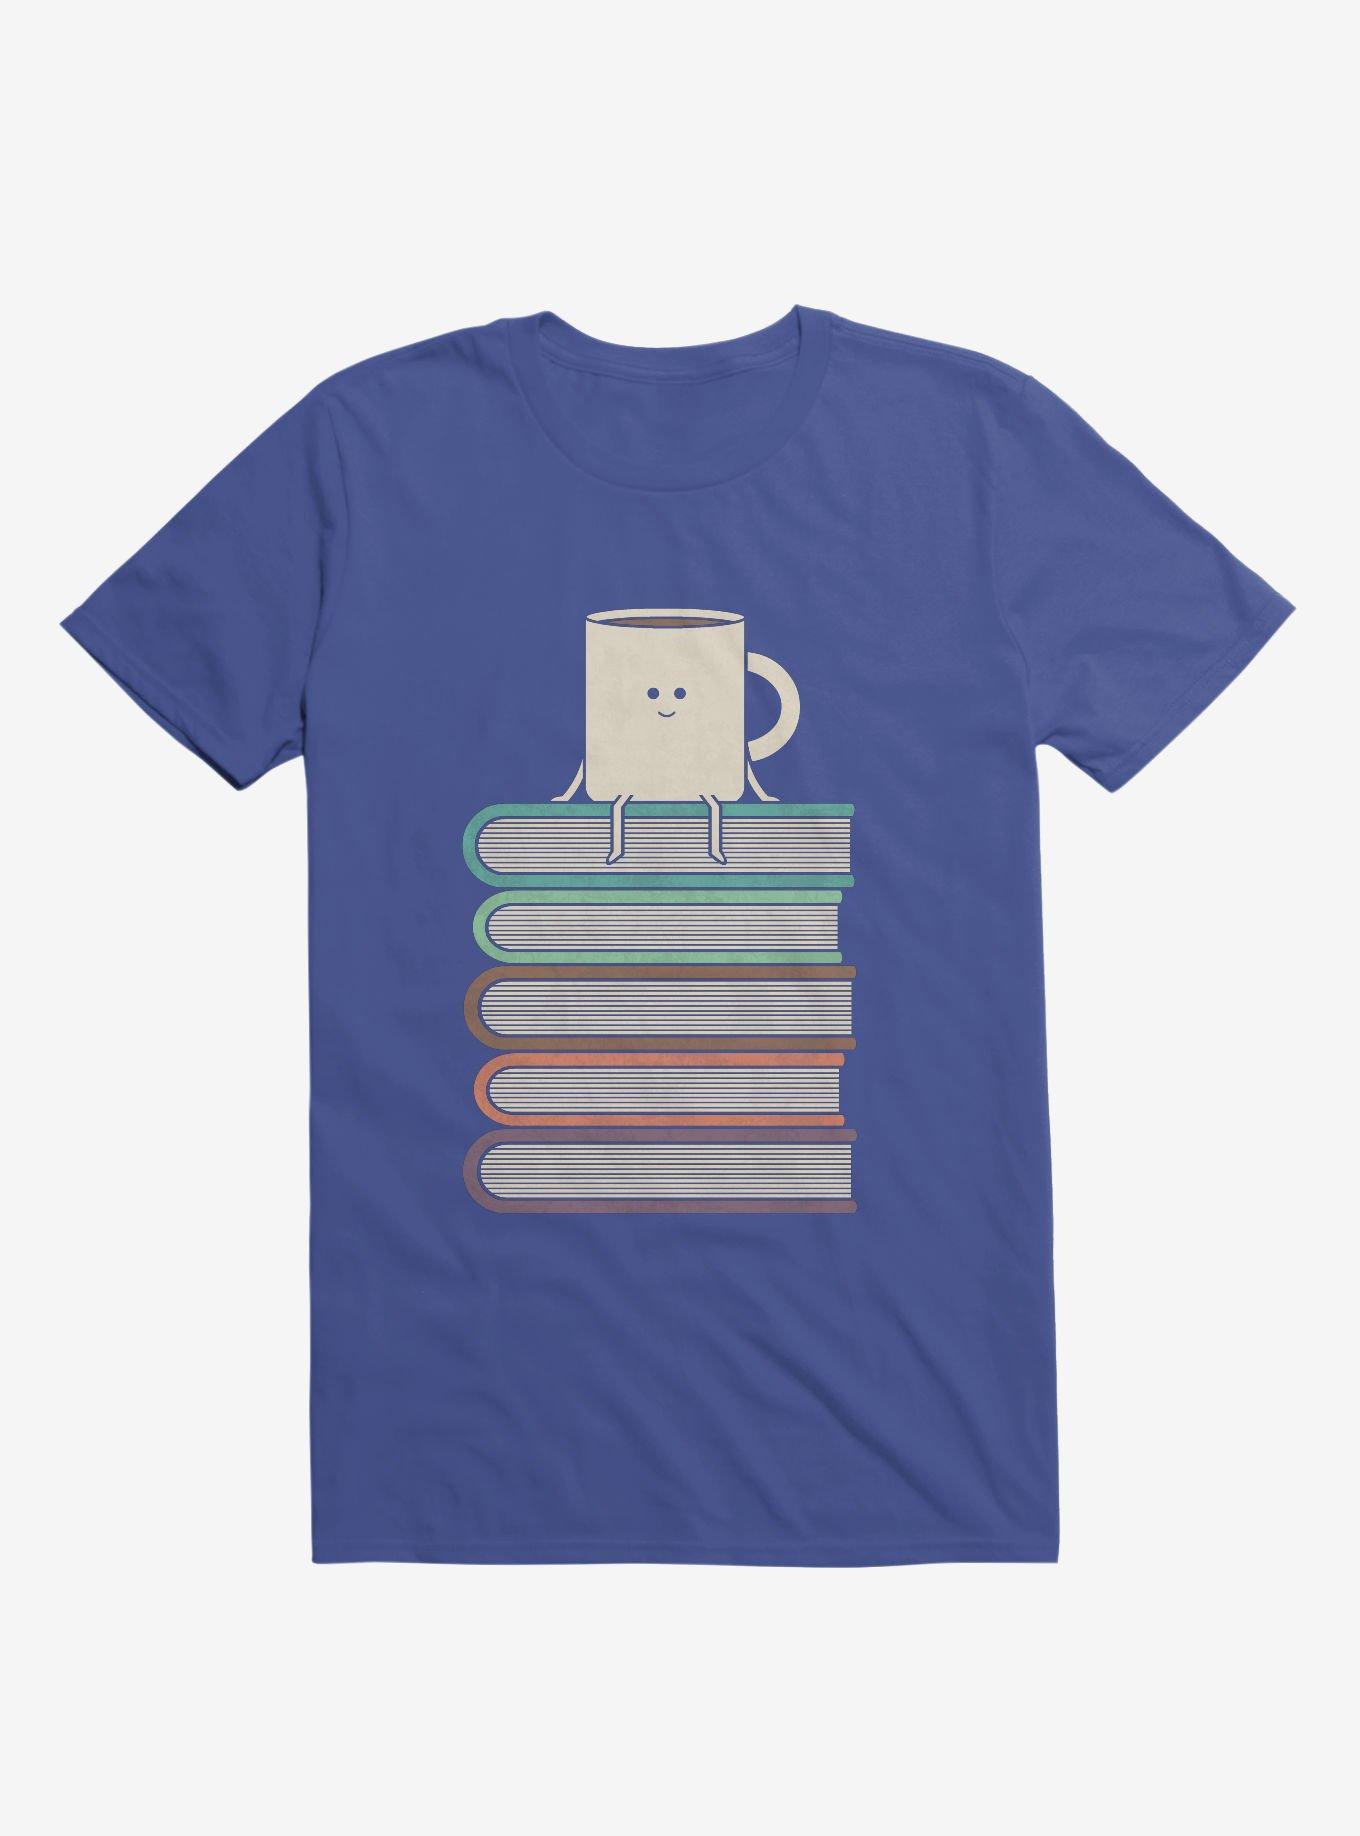 Top Of The World Cup On Books Royal Blue T-Shirt